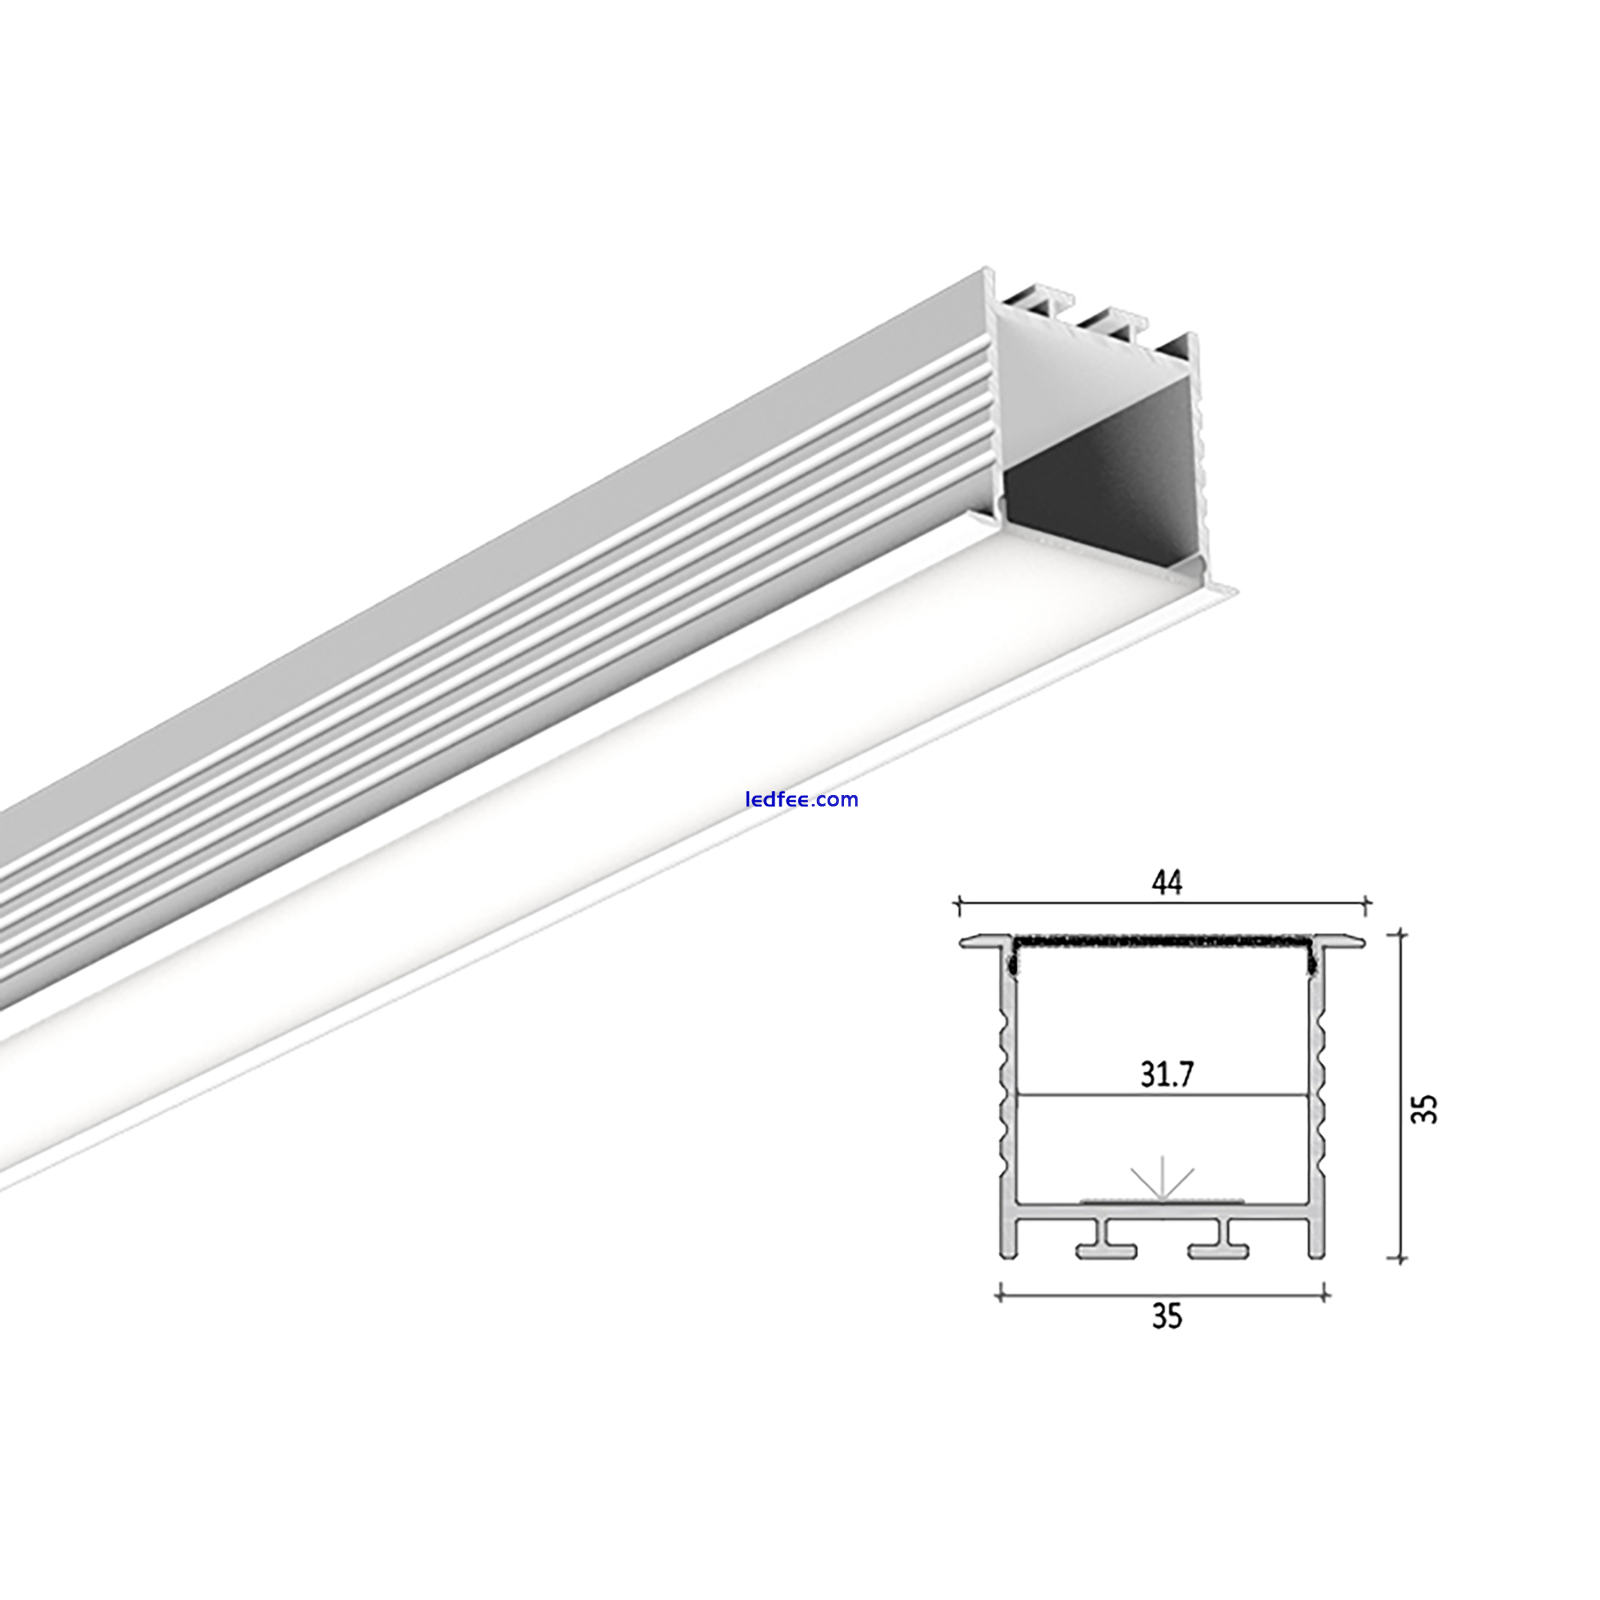 1M 2M LED Profile Aluminium Channel Extrusion Housing Track For LED Strip Light 2 